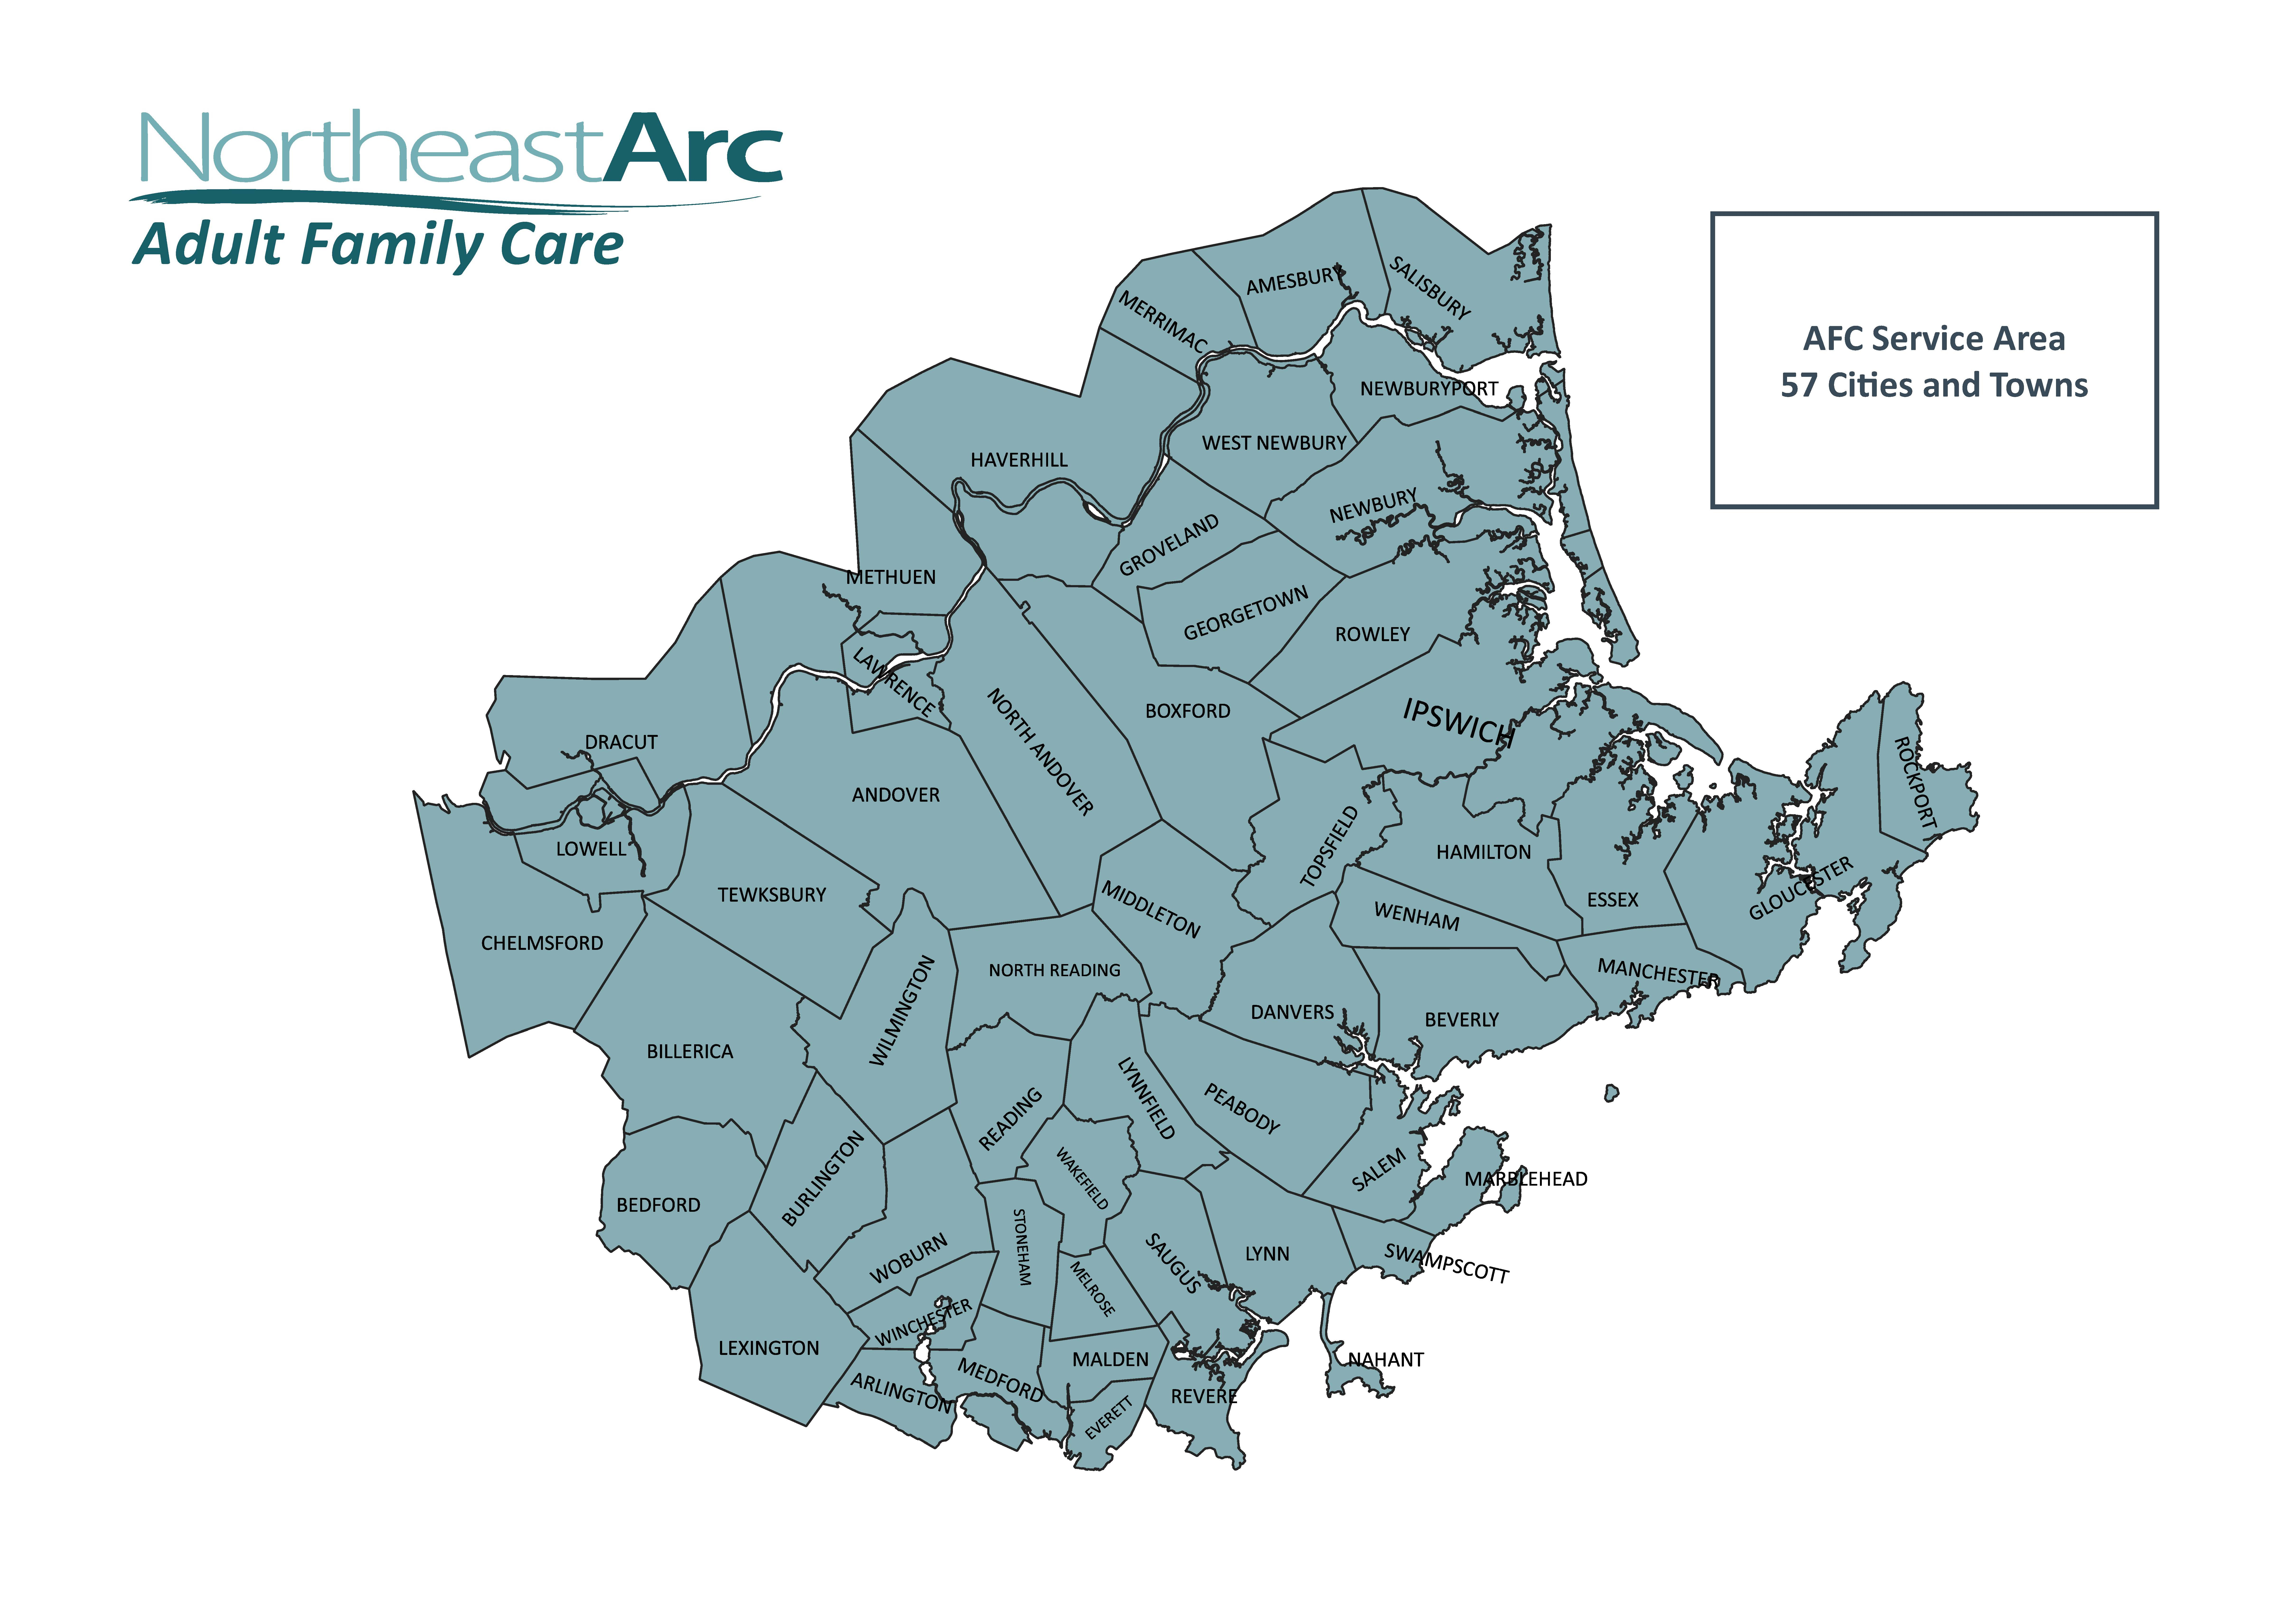 Northeast Arc Adult Family Care serves 57 cities and towns in Northeastern Massachusetts